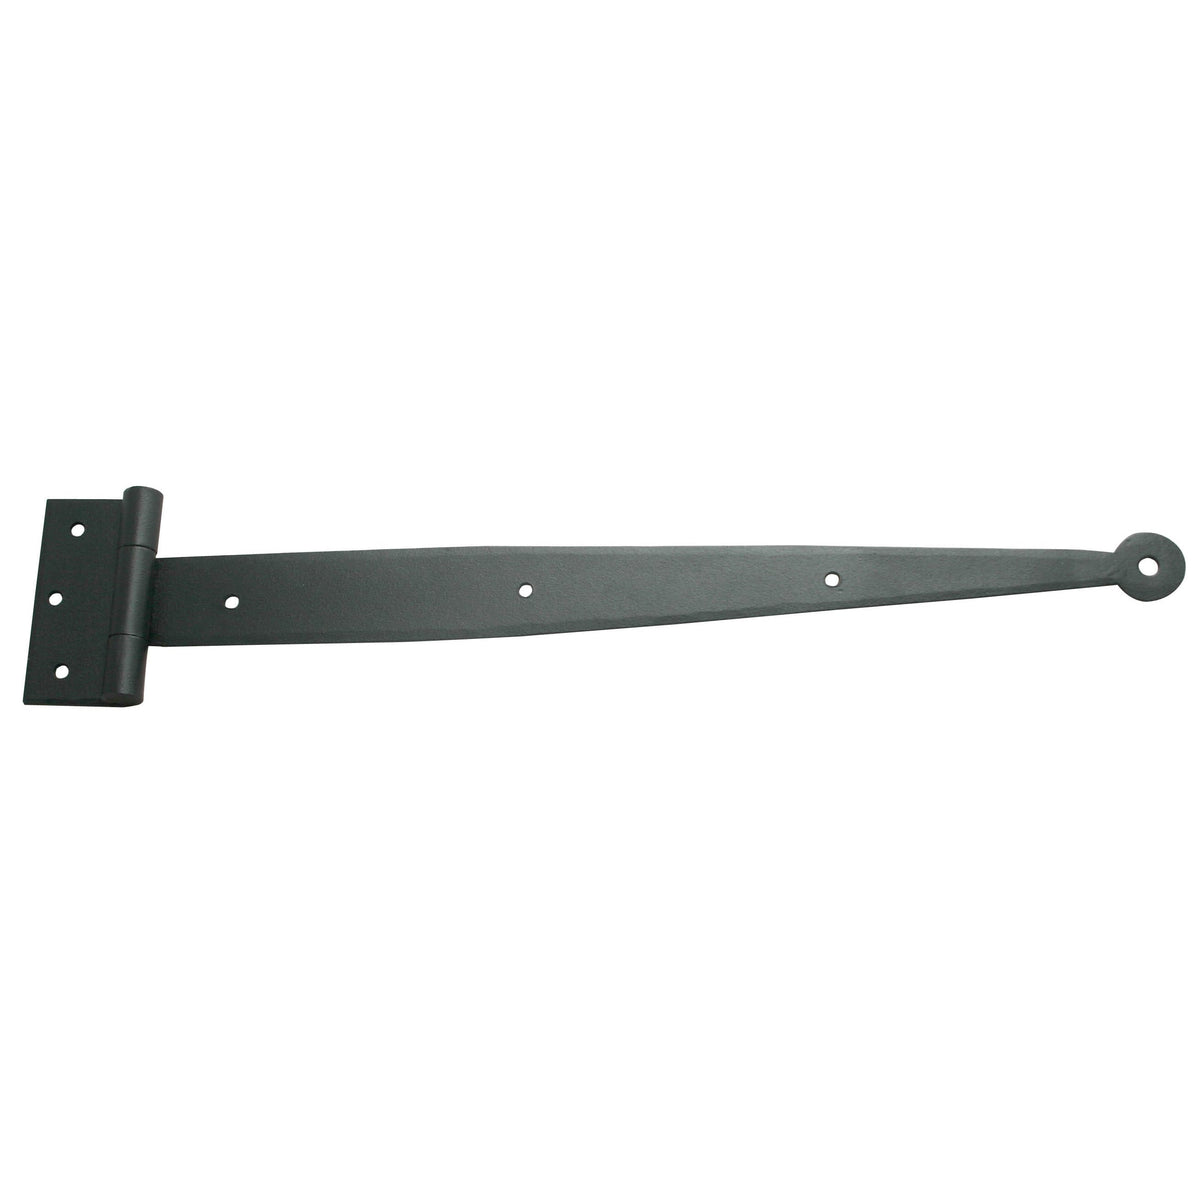 Strap Hinge for Shutters - Circle Tip - Multiple Sizes Available - Hand Forged Steel - Black Powder Coat Finish - Sold Individually